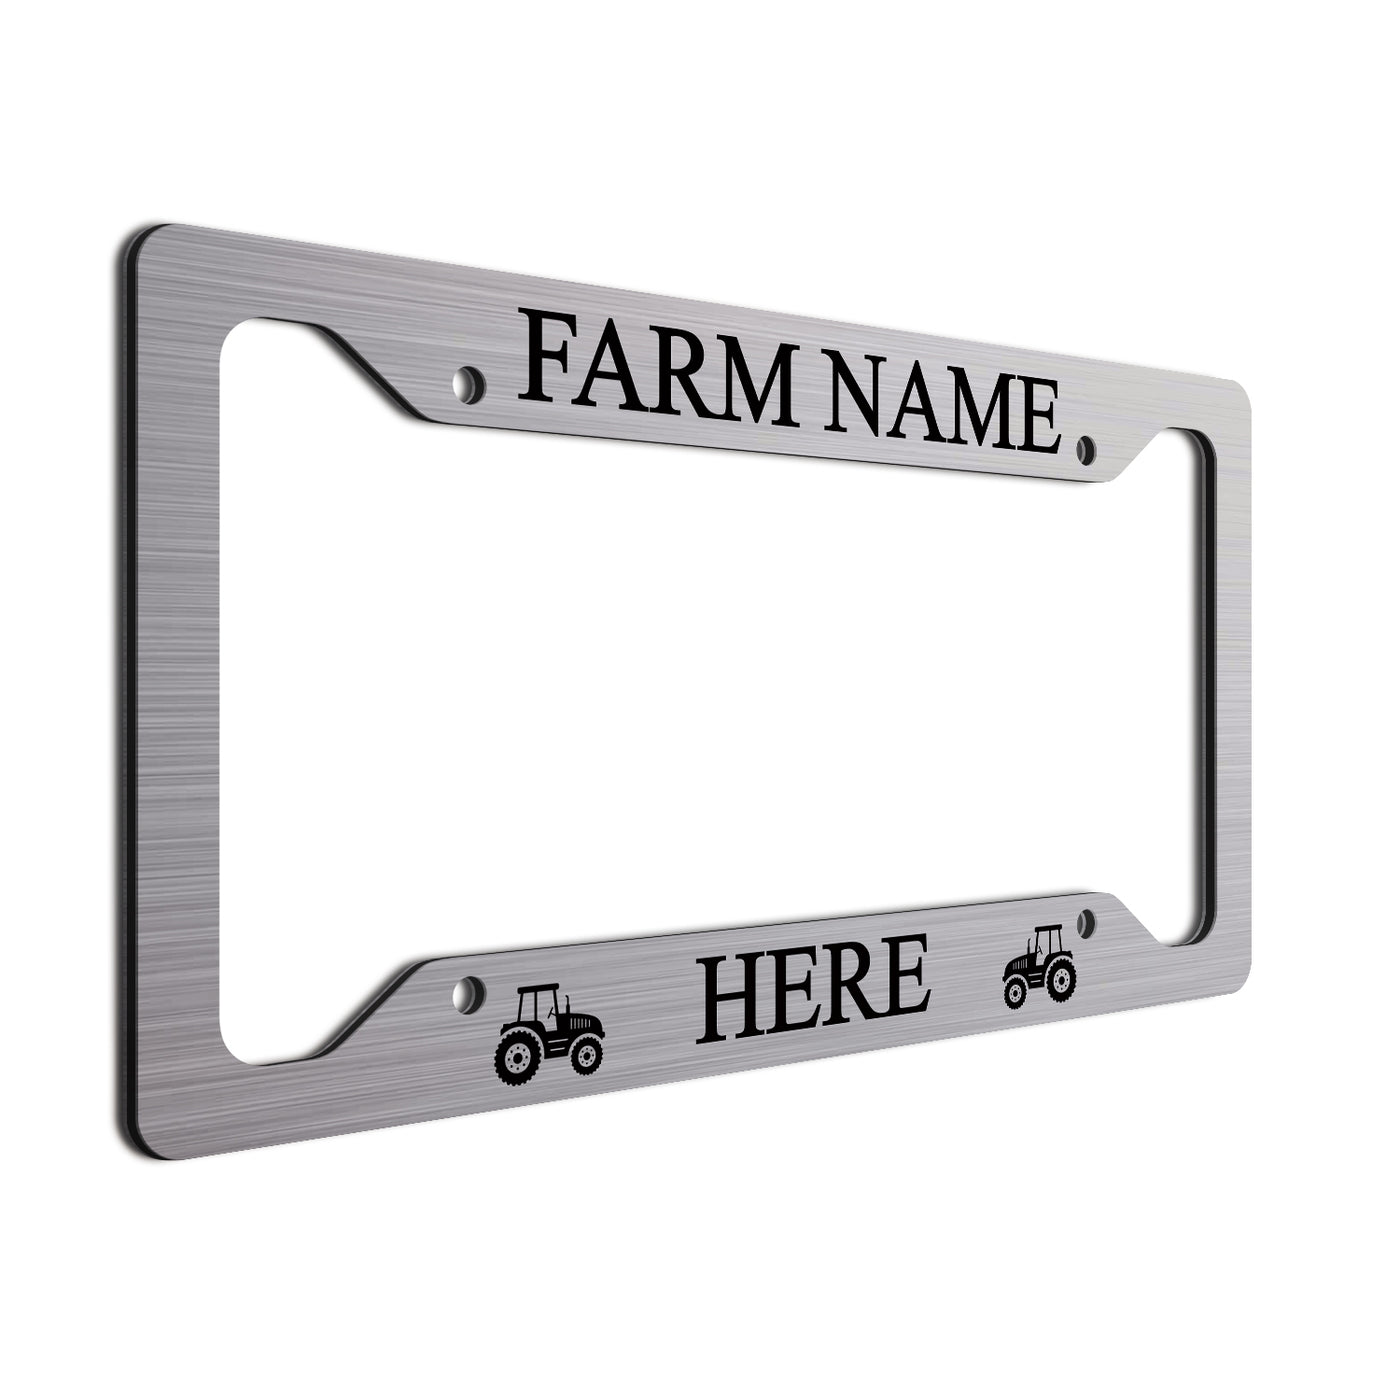 Personalized License Plate for Farmers